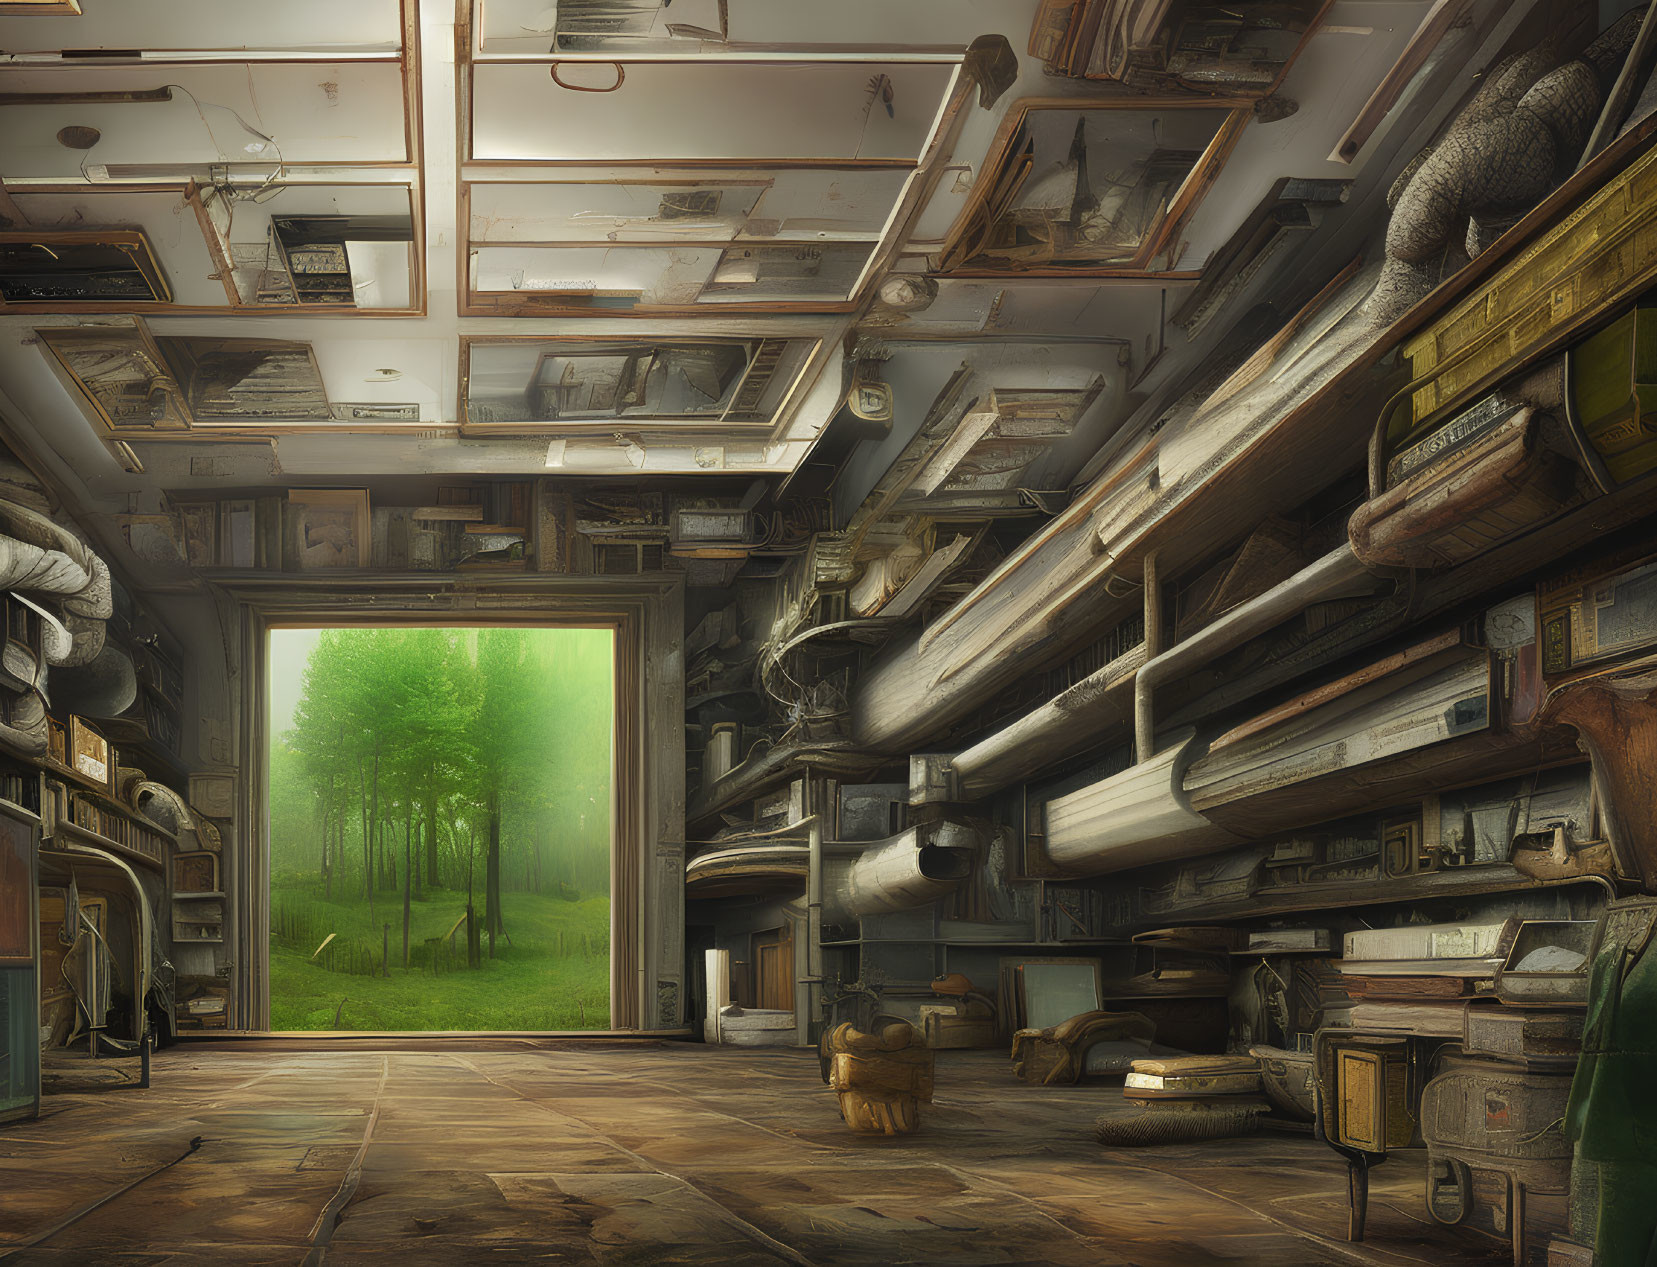 Room with books and furniture upside-down, door to outdoor scene with green trees